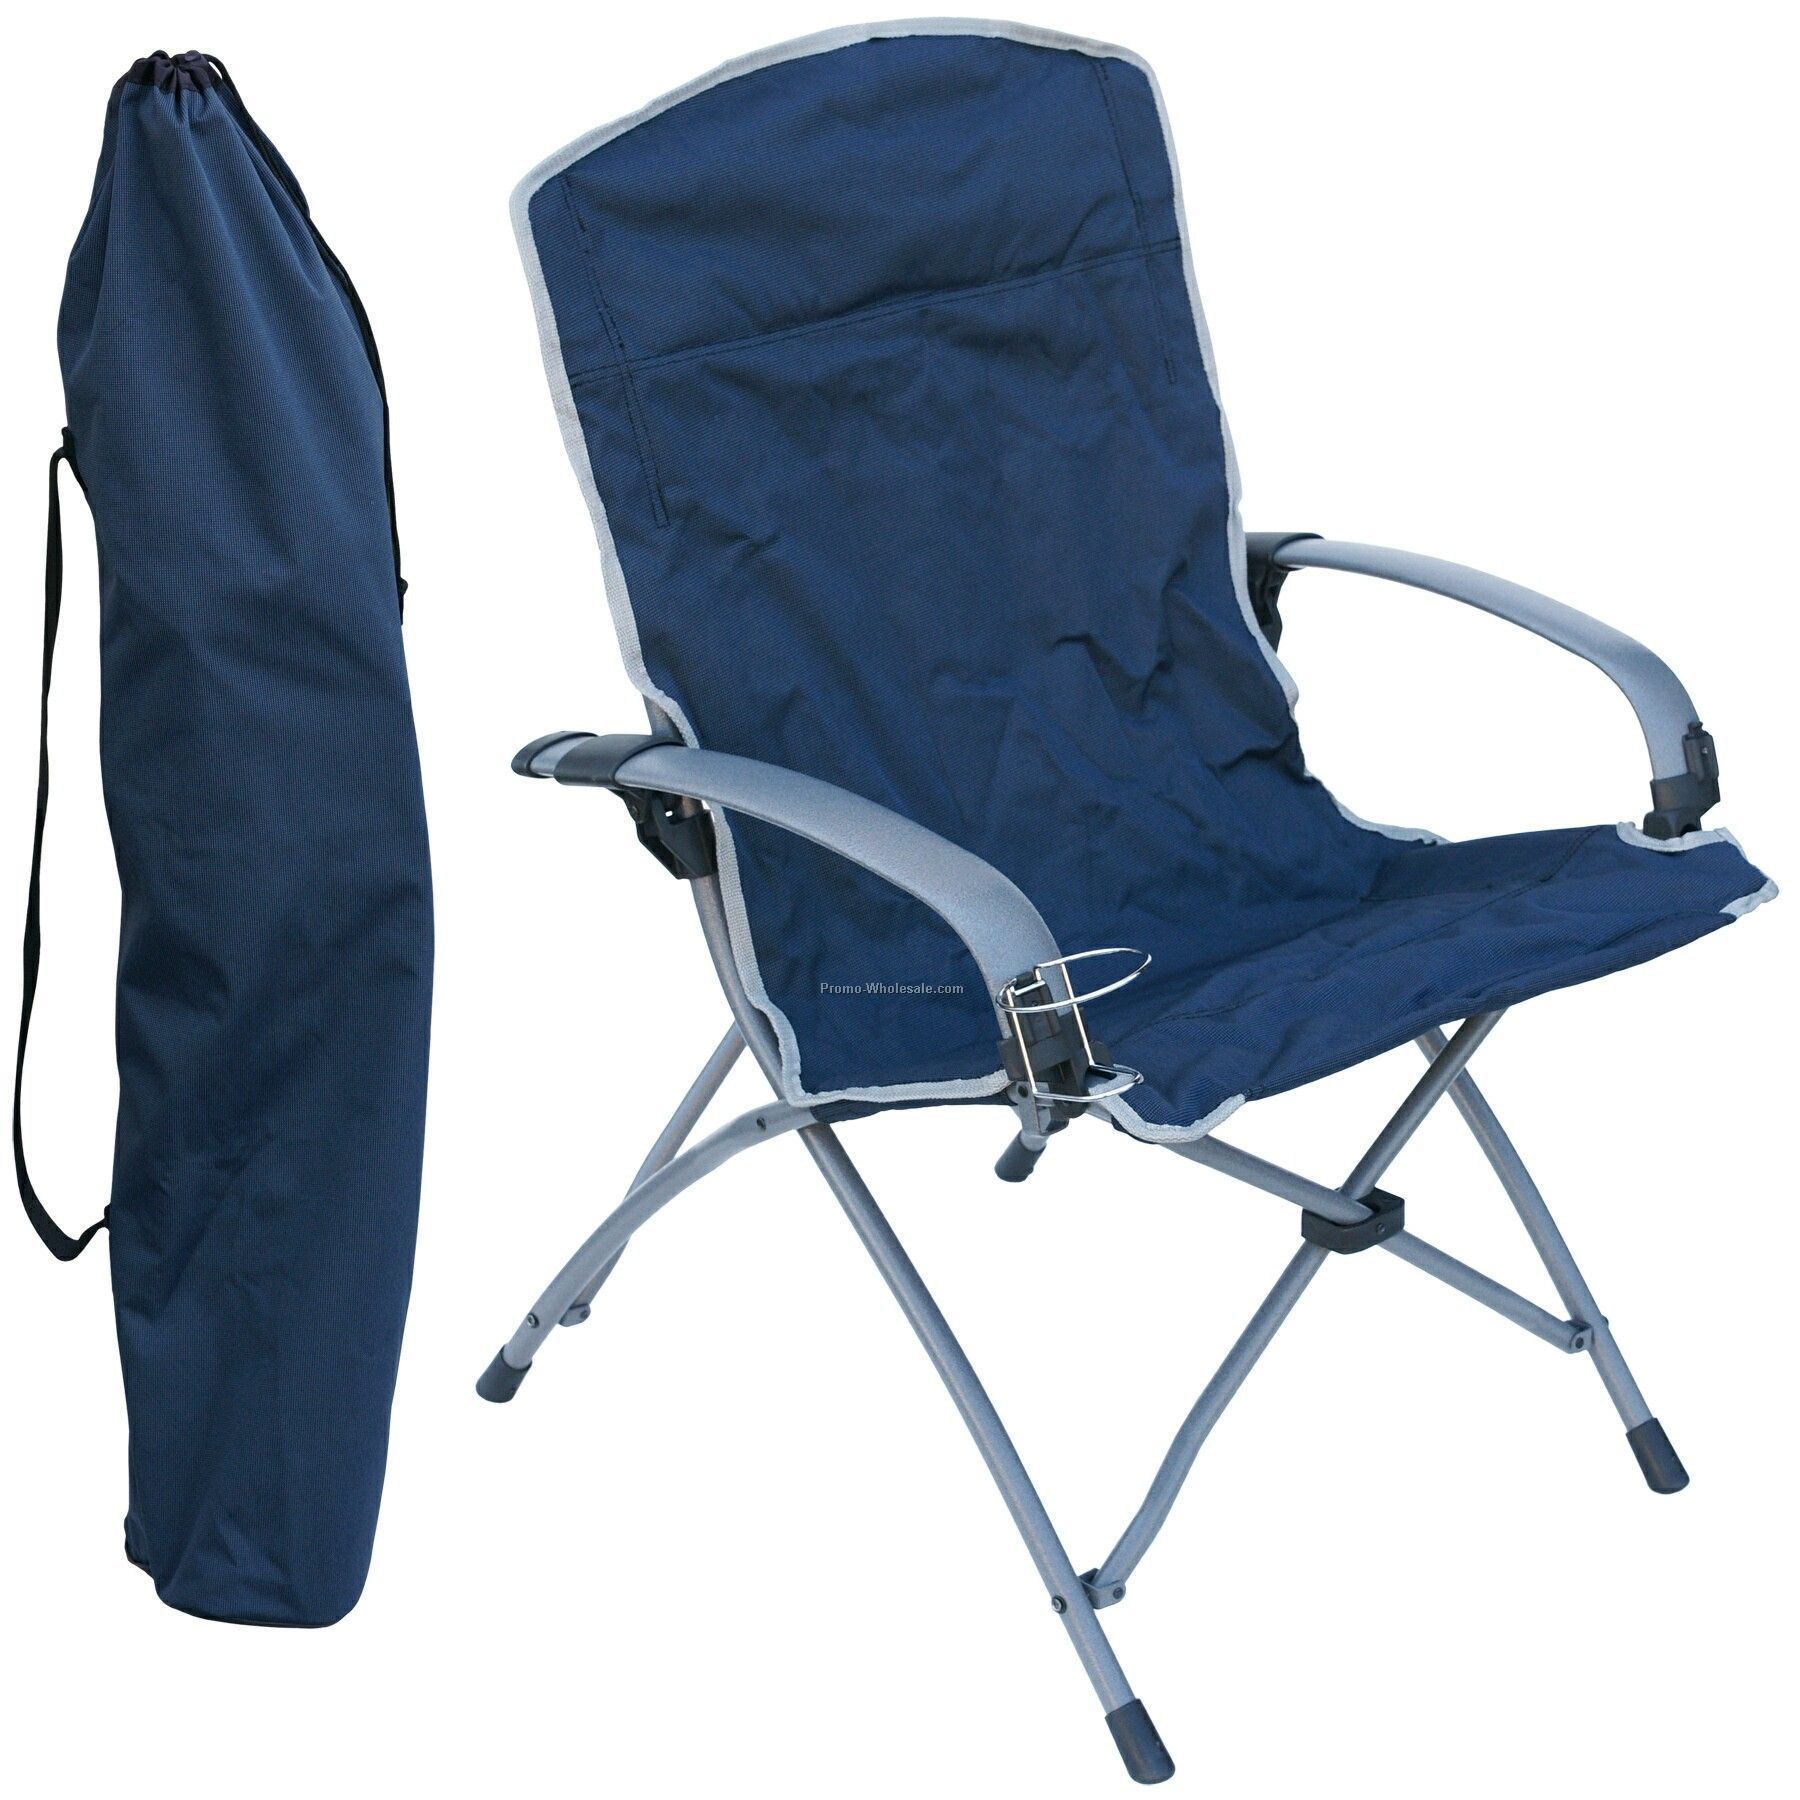 Deluxe Arm Chair W/ Removable Beverage Holder